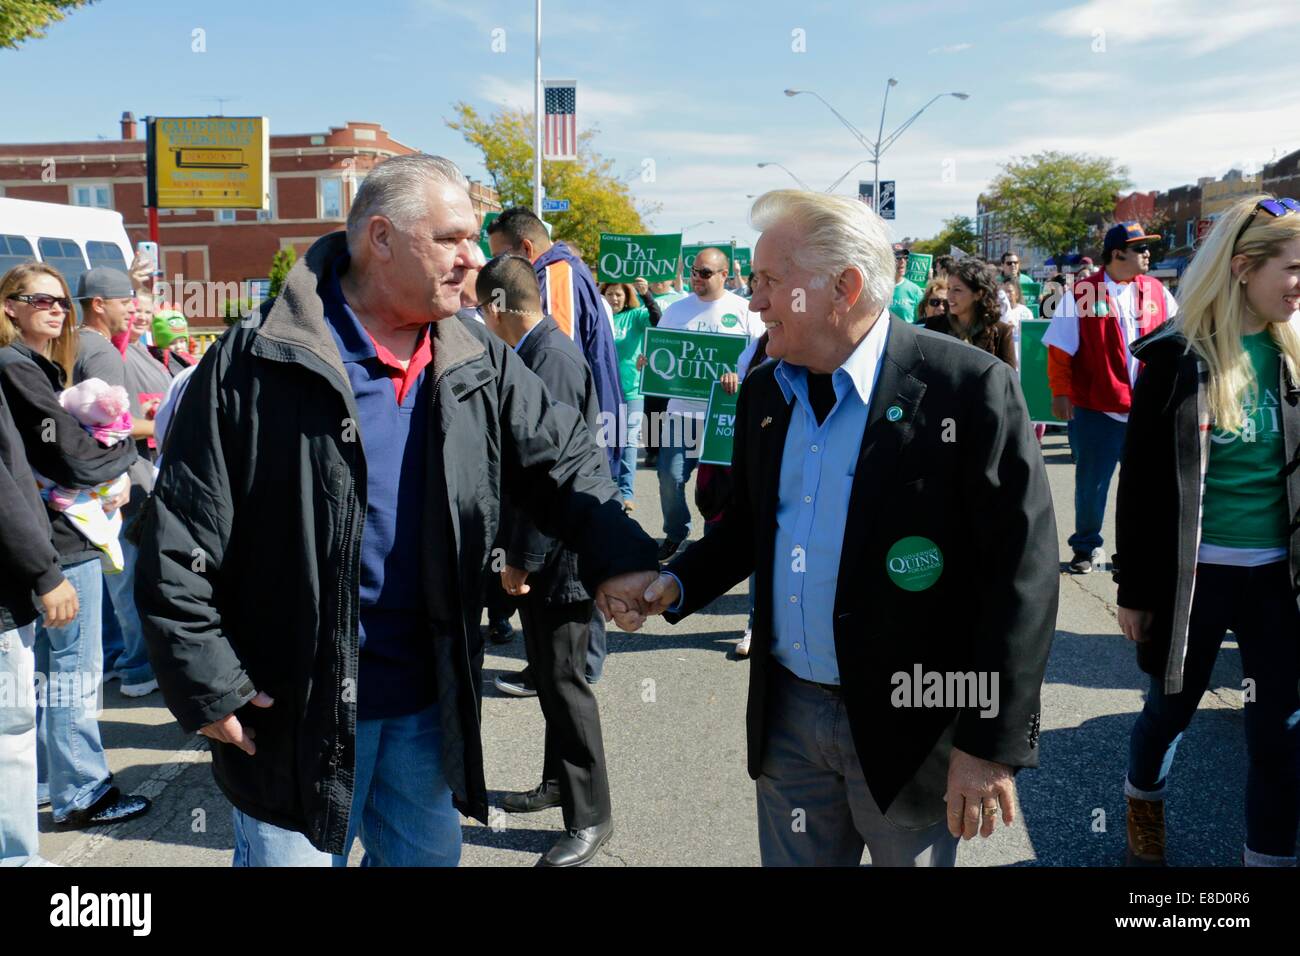 Cicero/Berwyn, Illinois, USA 5th October, 2014. Actor Martin Sheen greets a fan at Houby Fest. The festival is named after the Czech and Slovak word for mushroom and celebrates the many people of Czech and Slovak descent who call Cicero and Berwyn home. Mr. Sheen is famous for his portrayal of President Josiah Bartlett in the West Wing television series and numerous movie roles. Credit:  Todd Bannor/Alamy Live News Stock Photo